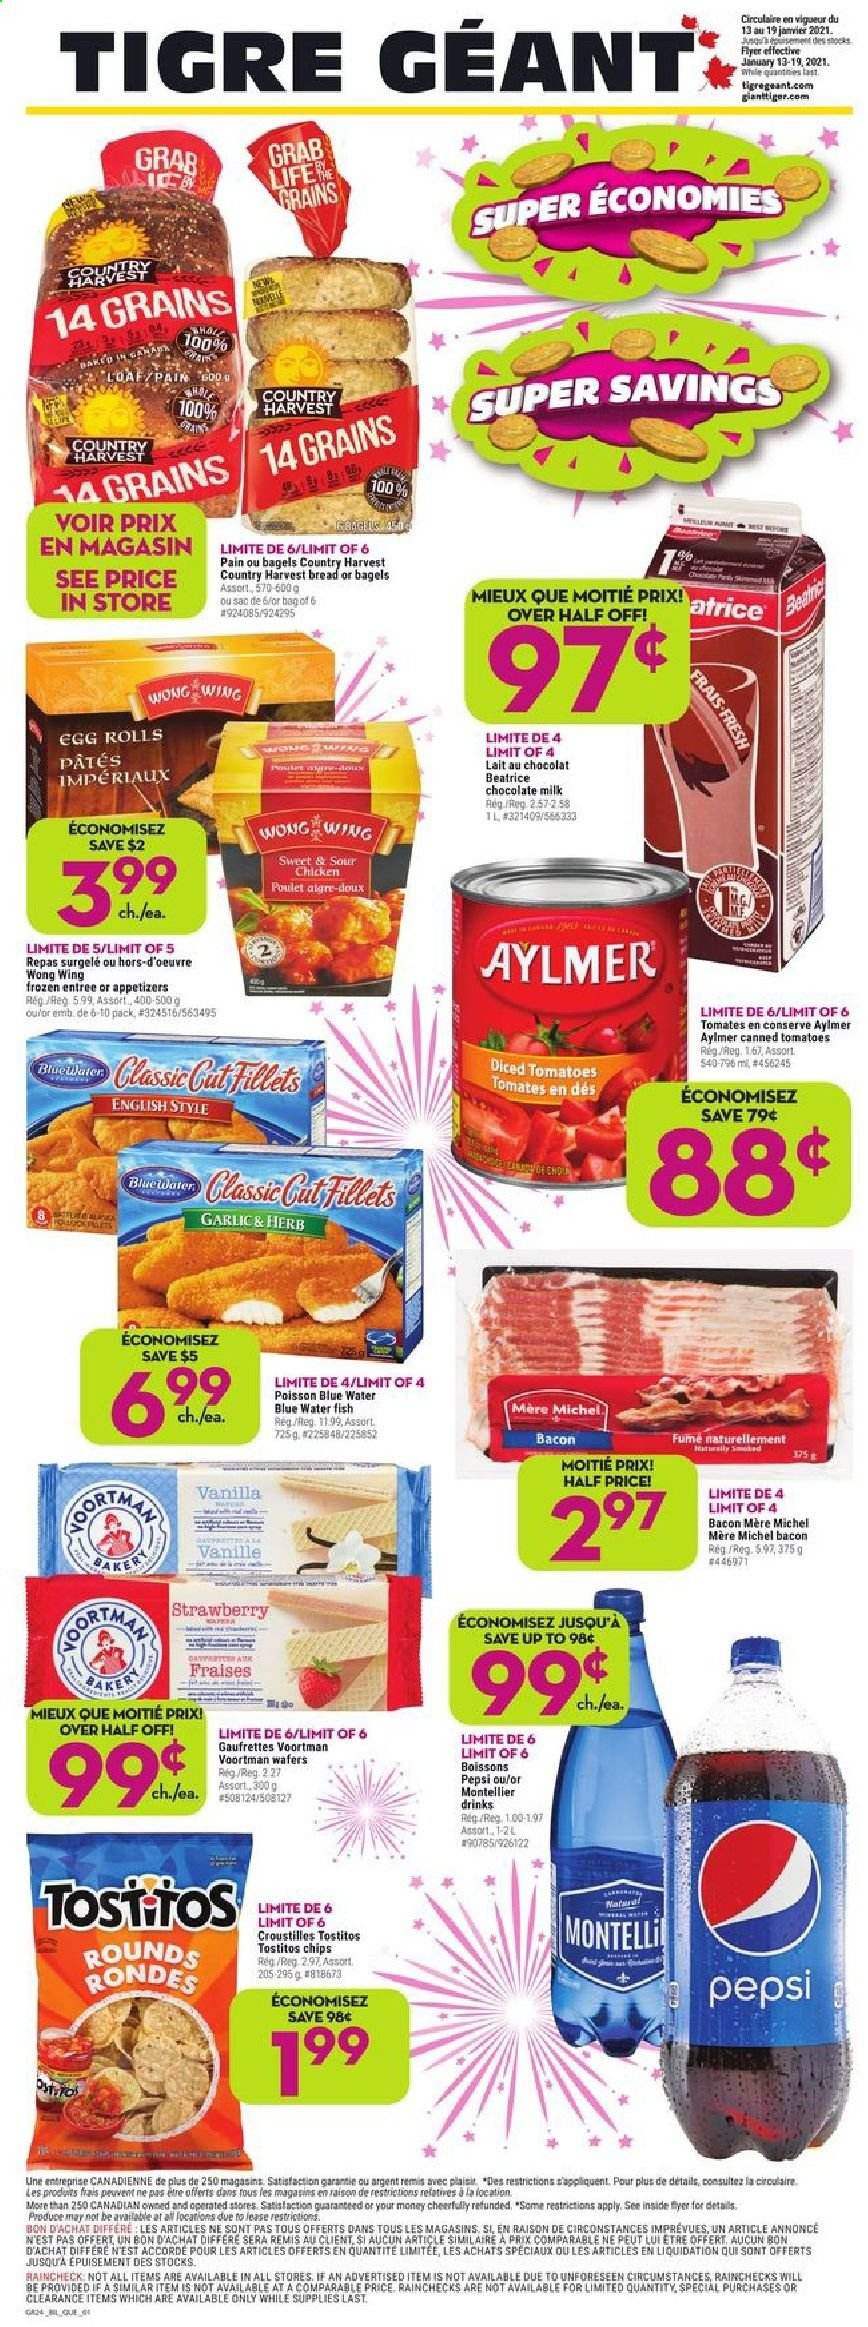 thumbnail - Giant Tiger Flyer - January 13, 2021 - January 19, 2021 - Sales products - bagels, tomatoes, fish, egg rolls, bacon, milk, Country Harvest, milk chocolate, wafers, chocolate, Tostitos, Pepsi. Page 1.